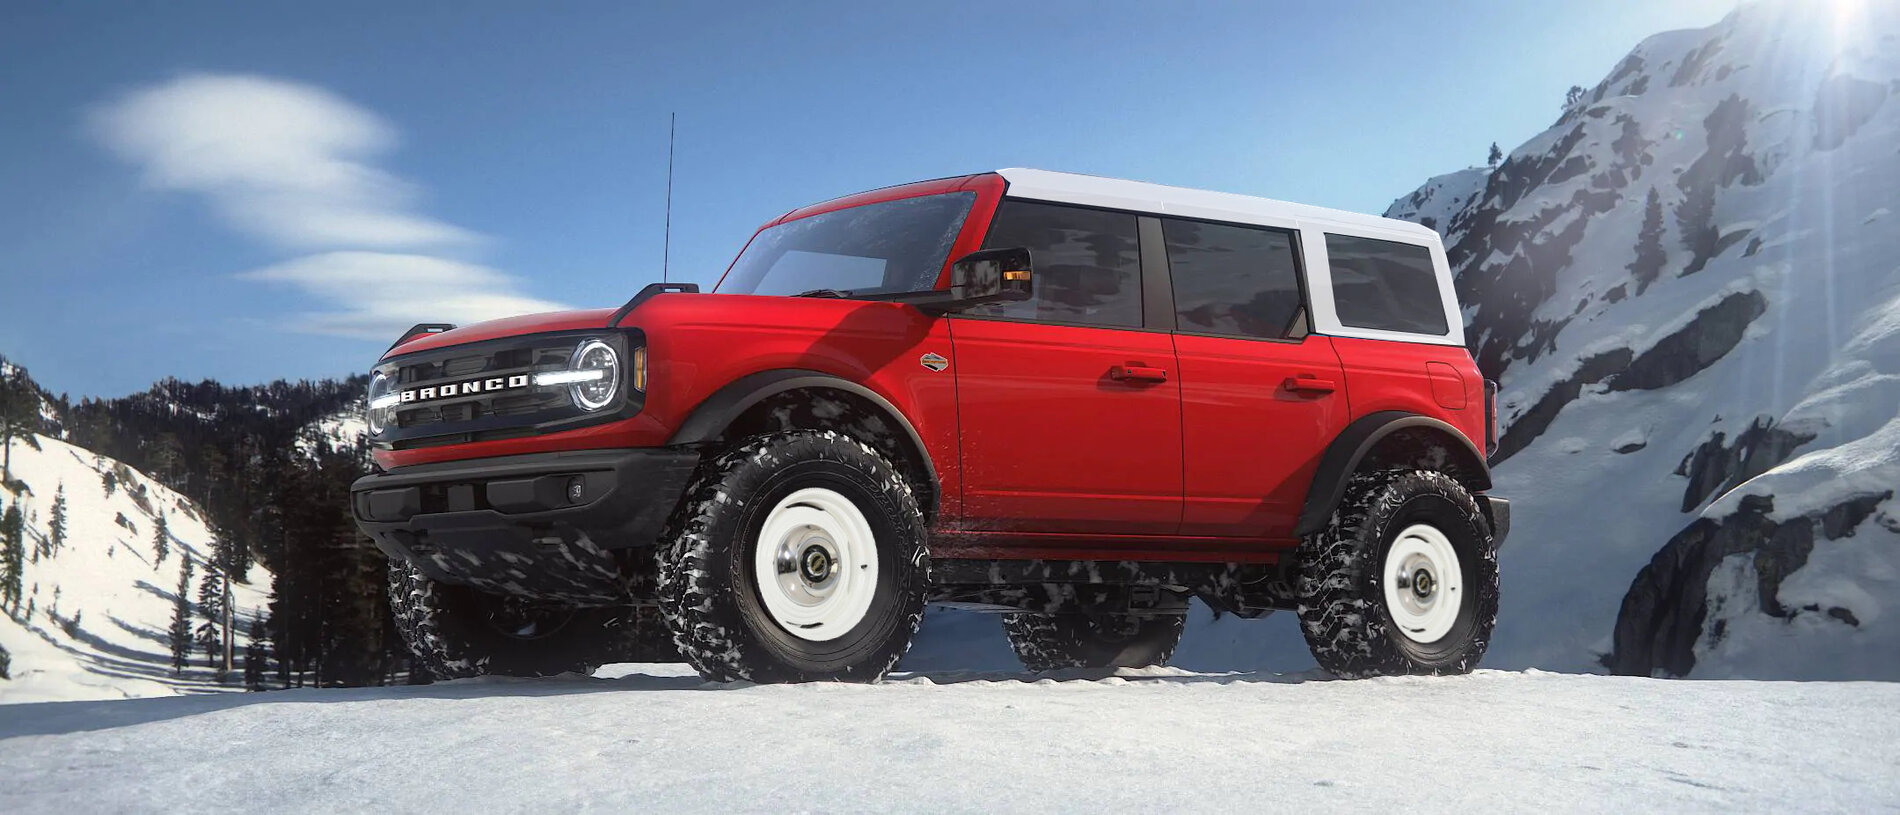 Ford Bronco Photoshop request - Dog-dish Hubcpas u725_21_race_red_env_2 (2)